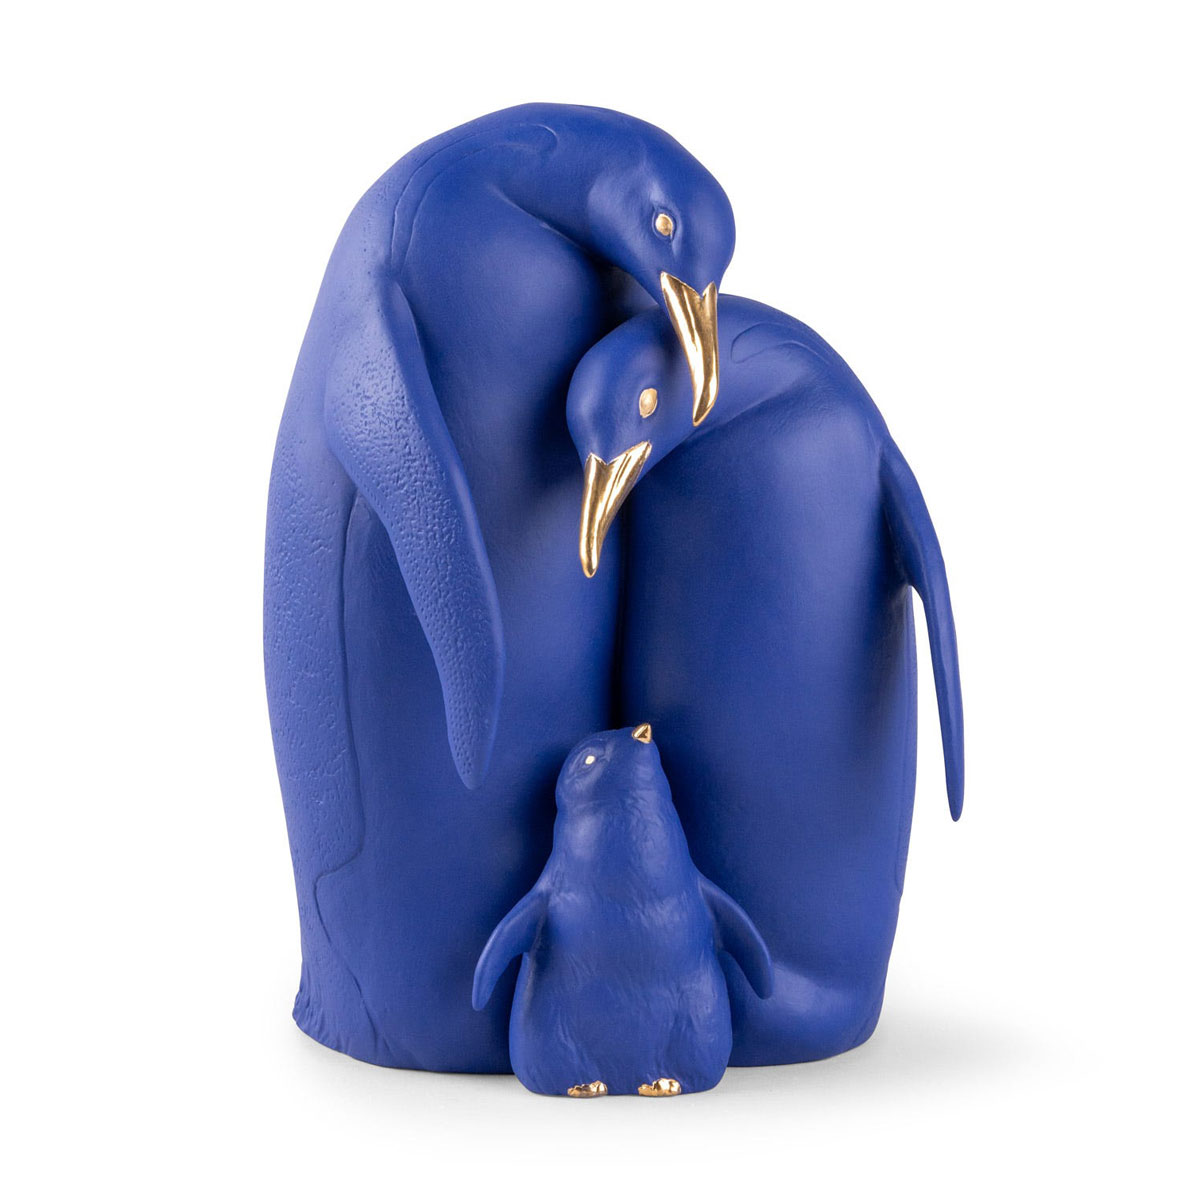 Lladro Design Figures, Penguin Family Sculpture. Limited Edition. Blue And Gold